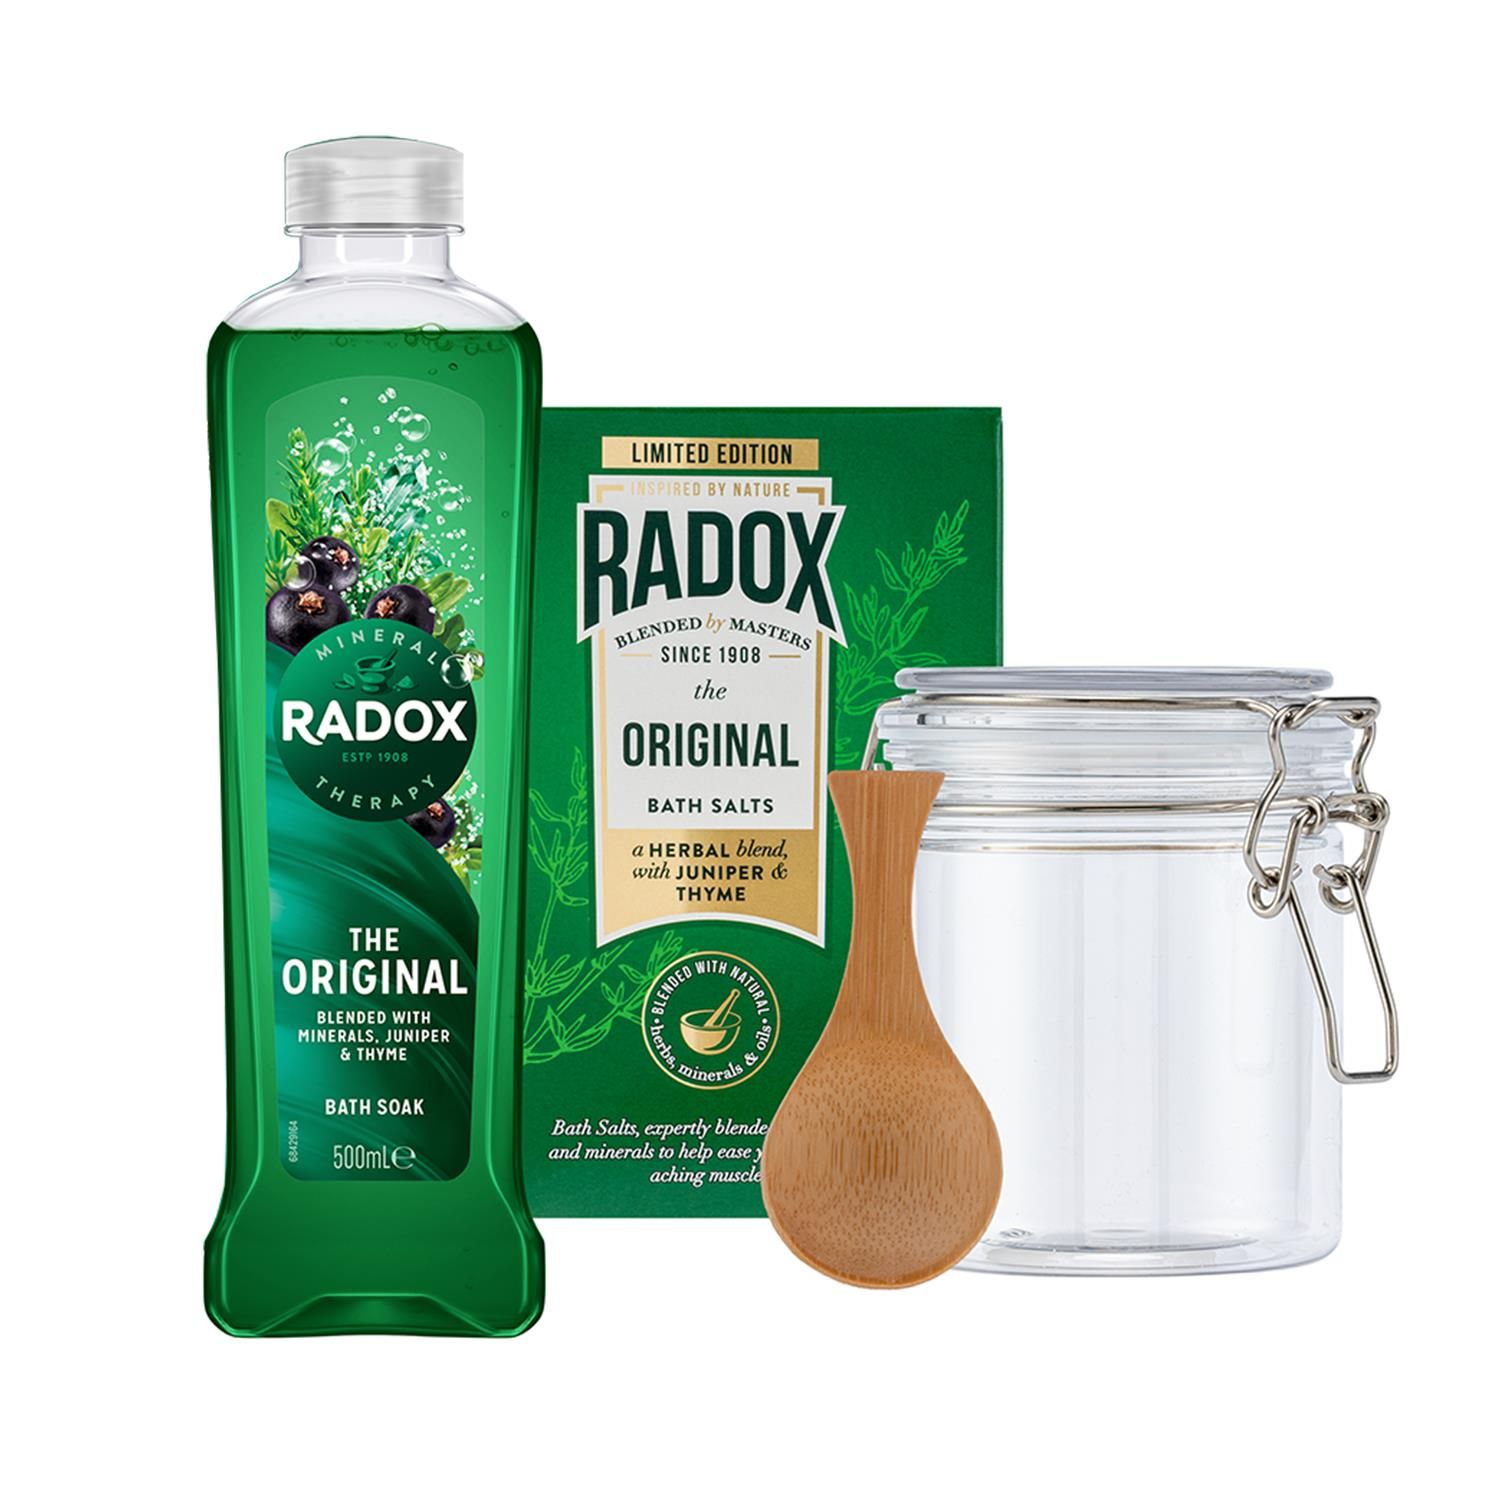 Know someone who loves to cares for their body and looking for the perfect relaxation enriched with minerals and herbs extracts here is the perfect gift introduced by Radox that comes with the complete Radox Luxurious Bath Collection Gift Set. When your body’s trying to tell you something. Time to listen. Time to swap press-ups and lunging for lounging. Don’t float like a butterfly, sink like a stone into a warm juniper and thyme-scented bath for some well-deserved me-time. From troubles to bubbles, close your eyes, relax and recover. 

Enjoy the soothing blend of minerals, juniper, and thyme with Radox The Original Bath Soak. From troubles to bubbles, close your eyes and let the replenishing bath soak cleanse your body, and revive you. Radox Mineral Therapy The Original Bath Salts are crafted with 100% pure sea salt with natural calcium, sodium, and magnesium, the perfect blend to help you unwind in a relaxing bath. 

This is the perfect gift set that introduces your caring nature towards your loved ones as it also comes with a decanter, scoop & flannel so that there are no more things to look for. This Christmas enlightens by presenting this gift set to the one who matters to you the most!

Features:
Radox Mineral Therapy The Original Bath Salts are enriched with calcium, sodium and magnesium and are pH neutral, meaning they are suitable for all skin types.
Inspired by nature’s best ingredients, our premium bath salts are blended with the recharging extracts of juniper & thyme.
Enjoy the soothing blend of minerals, juniper and thyme with Radox The Original Bath Soak

Safety Warnings: Avoid contact with eyes. If eye contact occurs, rinse well with water. If rash or irritation occurs, discontinue use.

Gift Set Includes:

1x Radox The Original Bath Soak 500 ml,
1x Radox The Original Bath Salts 400 g,
1x Decanter,
1x Scoop,
1x Flannel